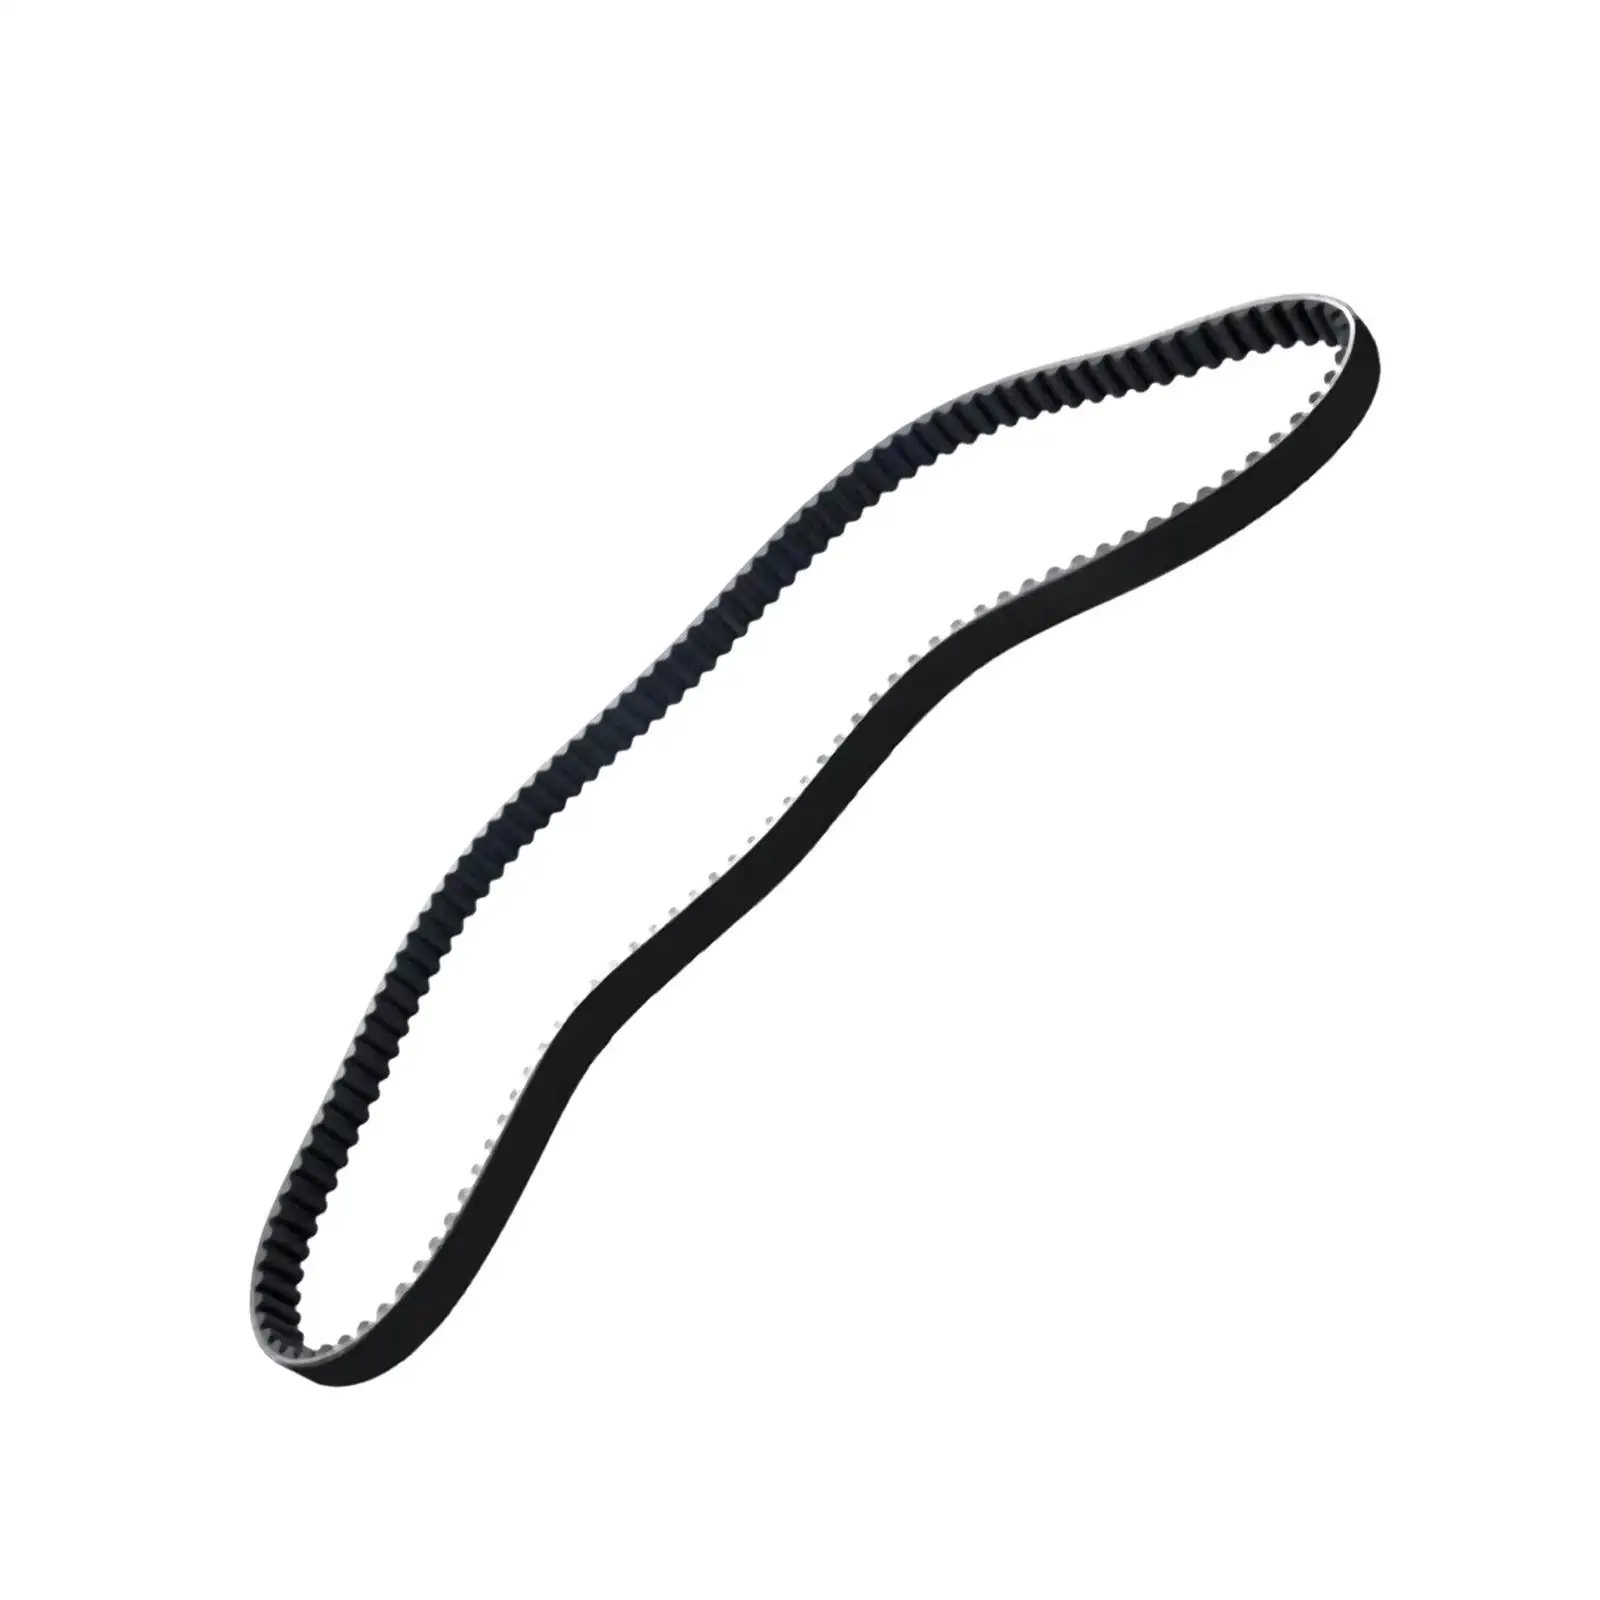 Rear Drive Belt Rubber 40001-85 Parabolic Tooth Profile Replacement Parts 136